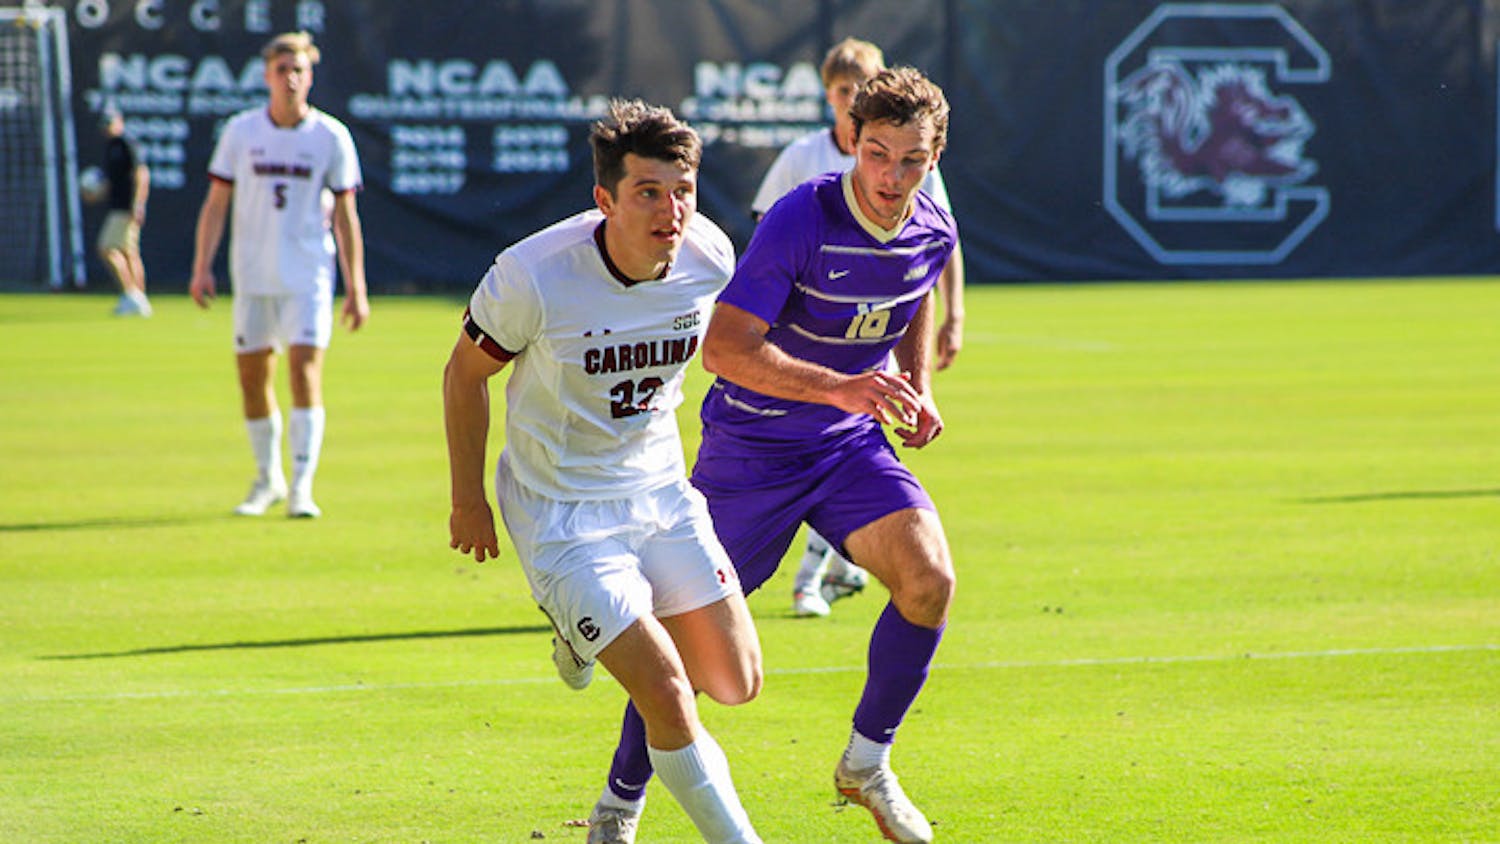 Senior midfielder Parker League looks for a teammate to pass the ball to as a James Madison defender closes in. The Gamecocks tied 1-1 with the Dukes on Oct. 23, 2022.